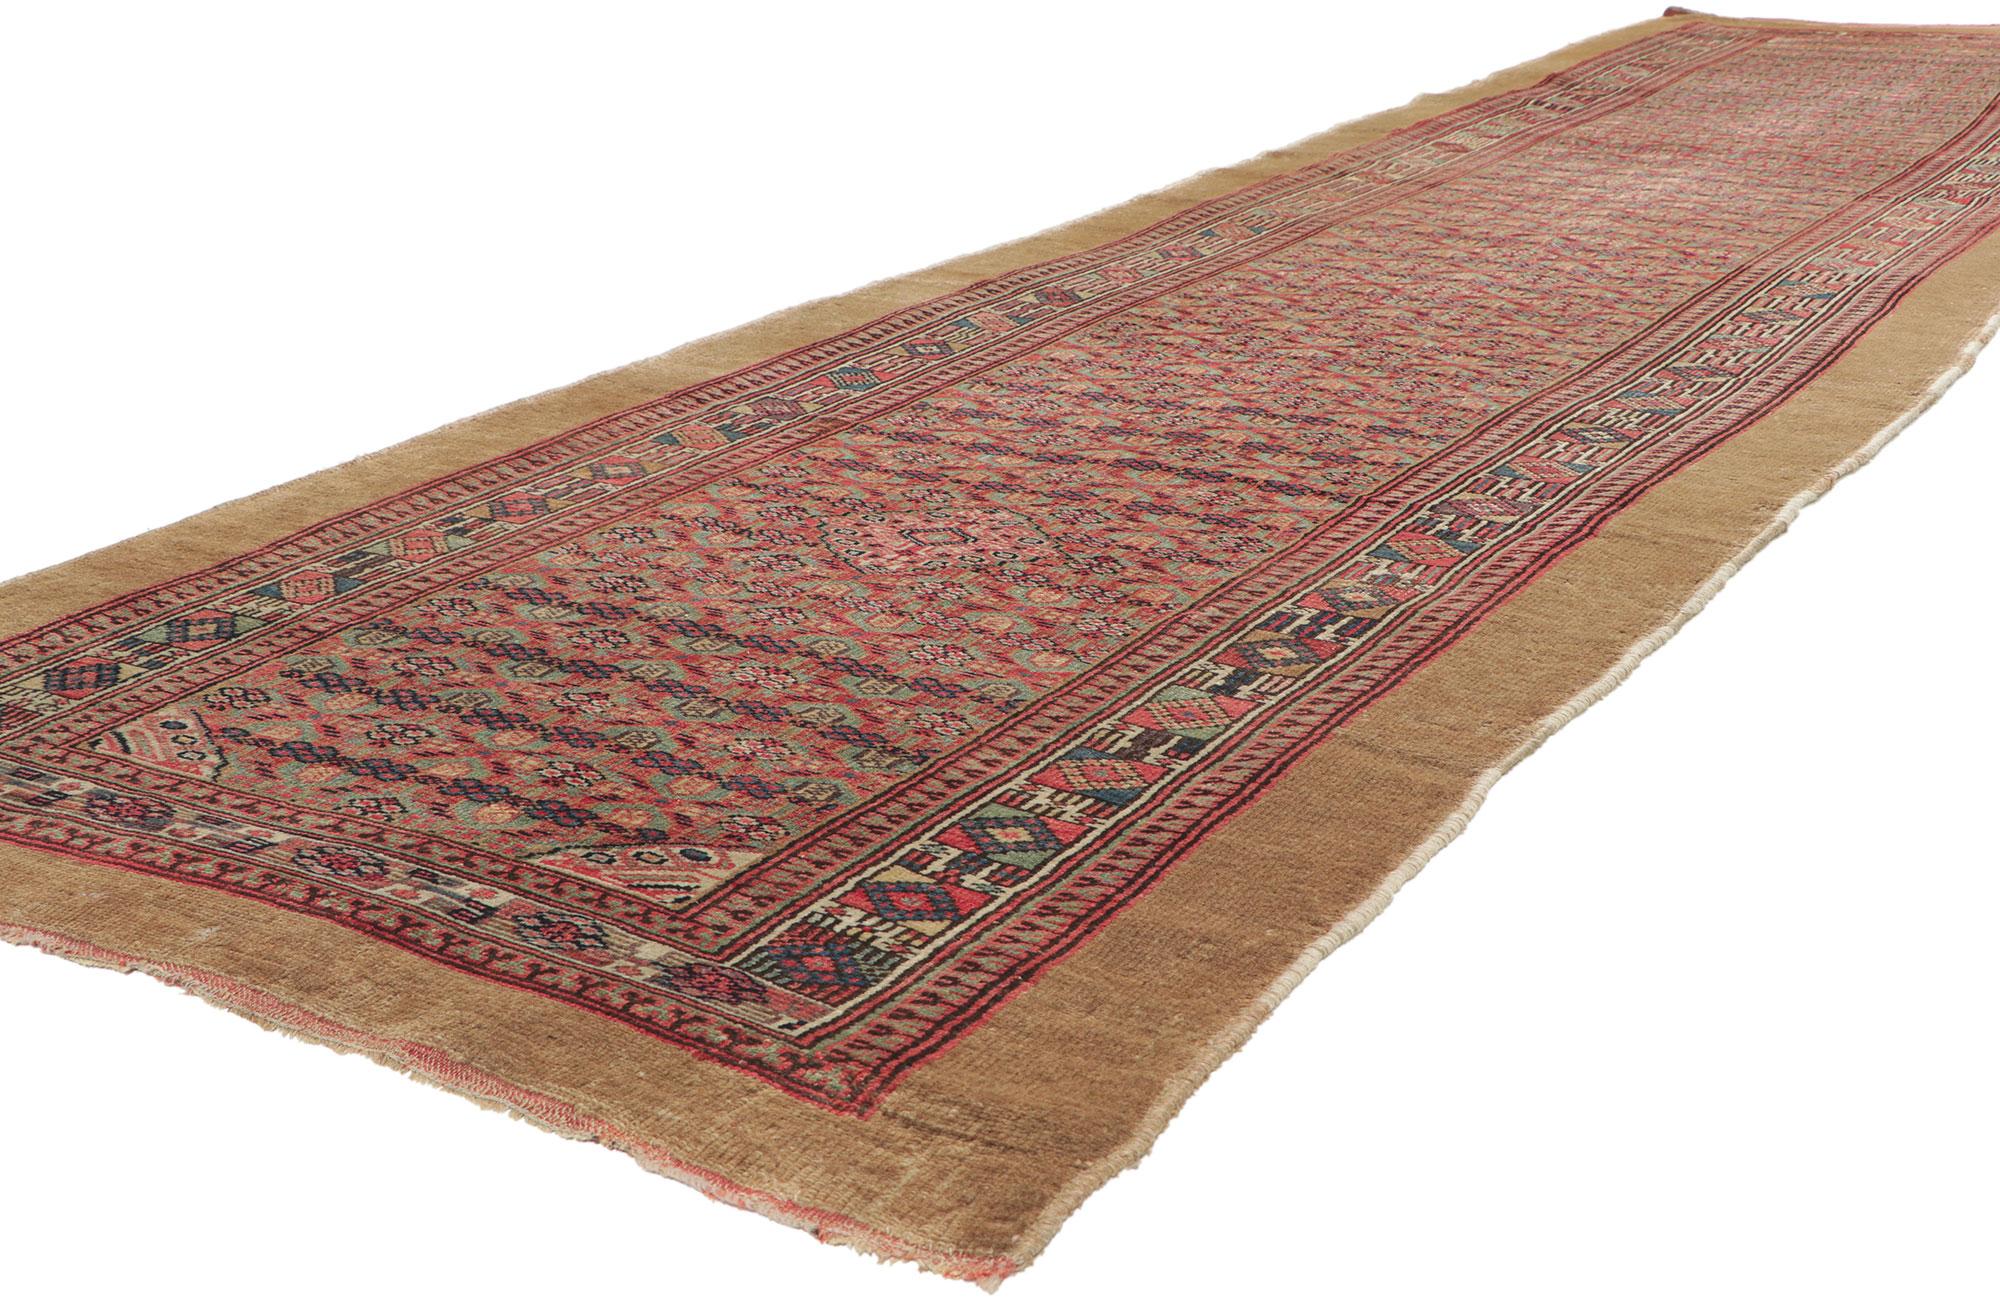 78522 Antique Persian Malayer Camel Hair Rug, 03'08 x 13'06.
Allover Pattern. Mina Khani Design.
Abrash.
Hand knotted wool. Hand knotted camel hair.
Made in Iran.
Measures: 03'08 x 13'06.
Date: Early 20th Century.